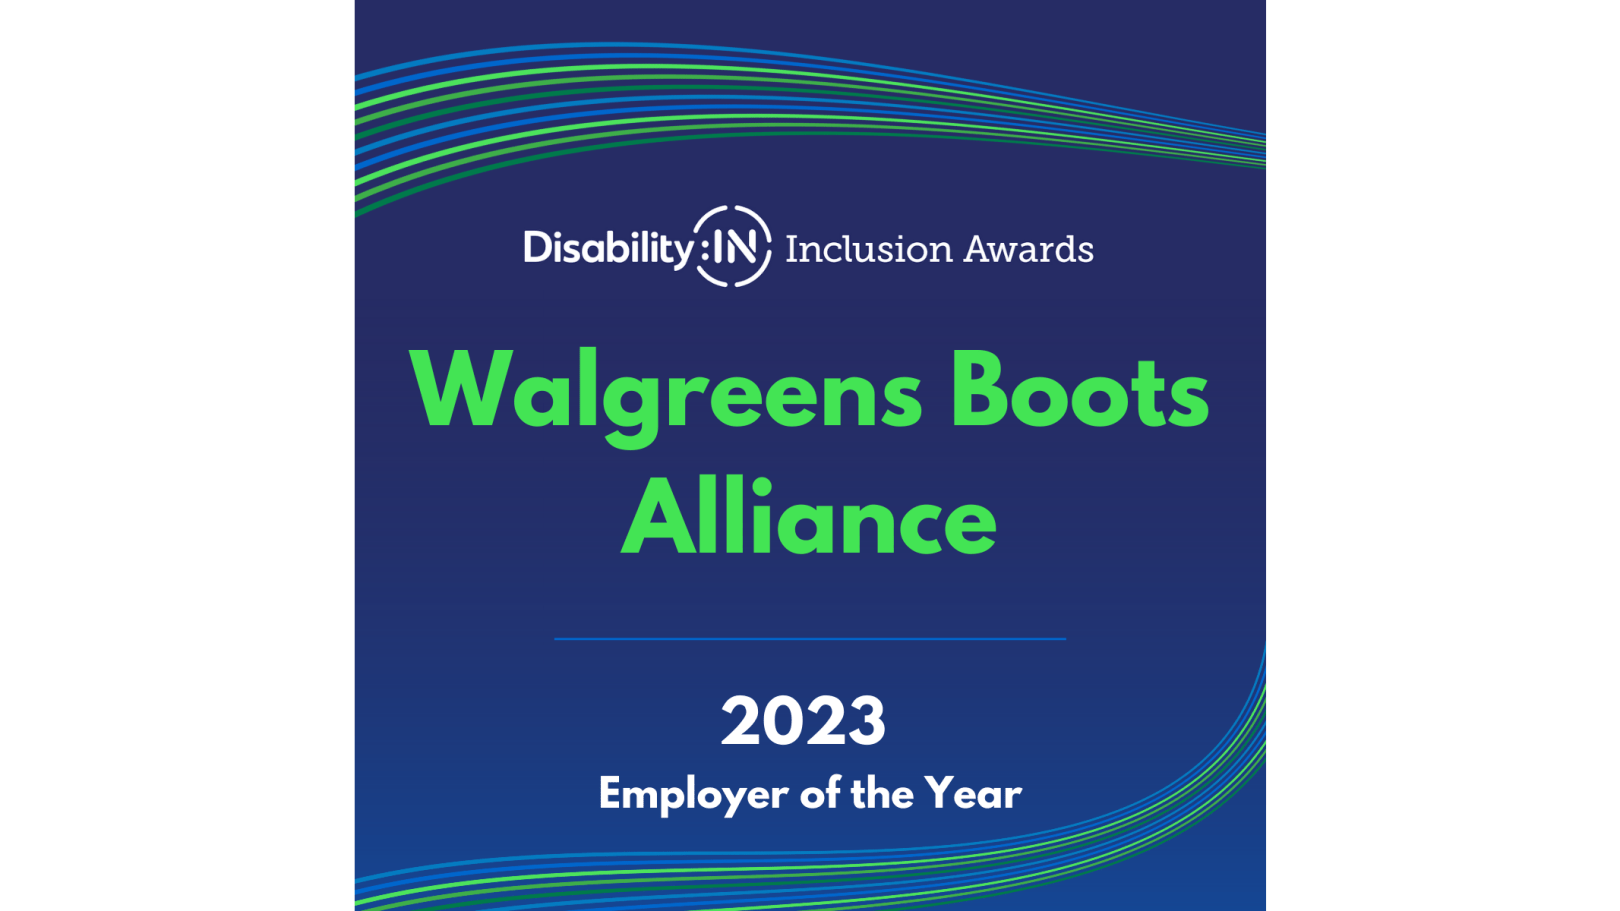 Walgreens Boots Alliance named Disability:IN’s 2023 Employer of the Year